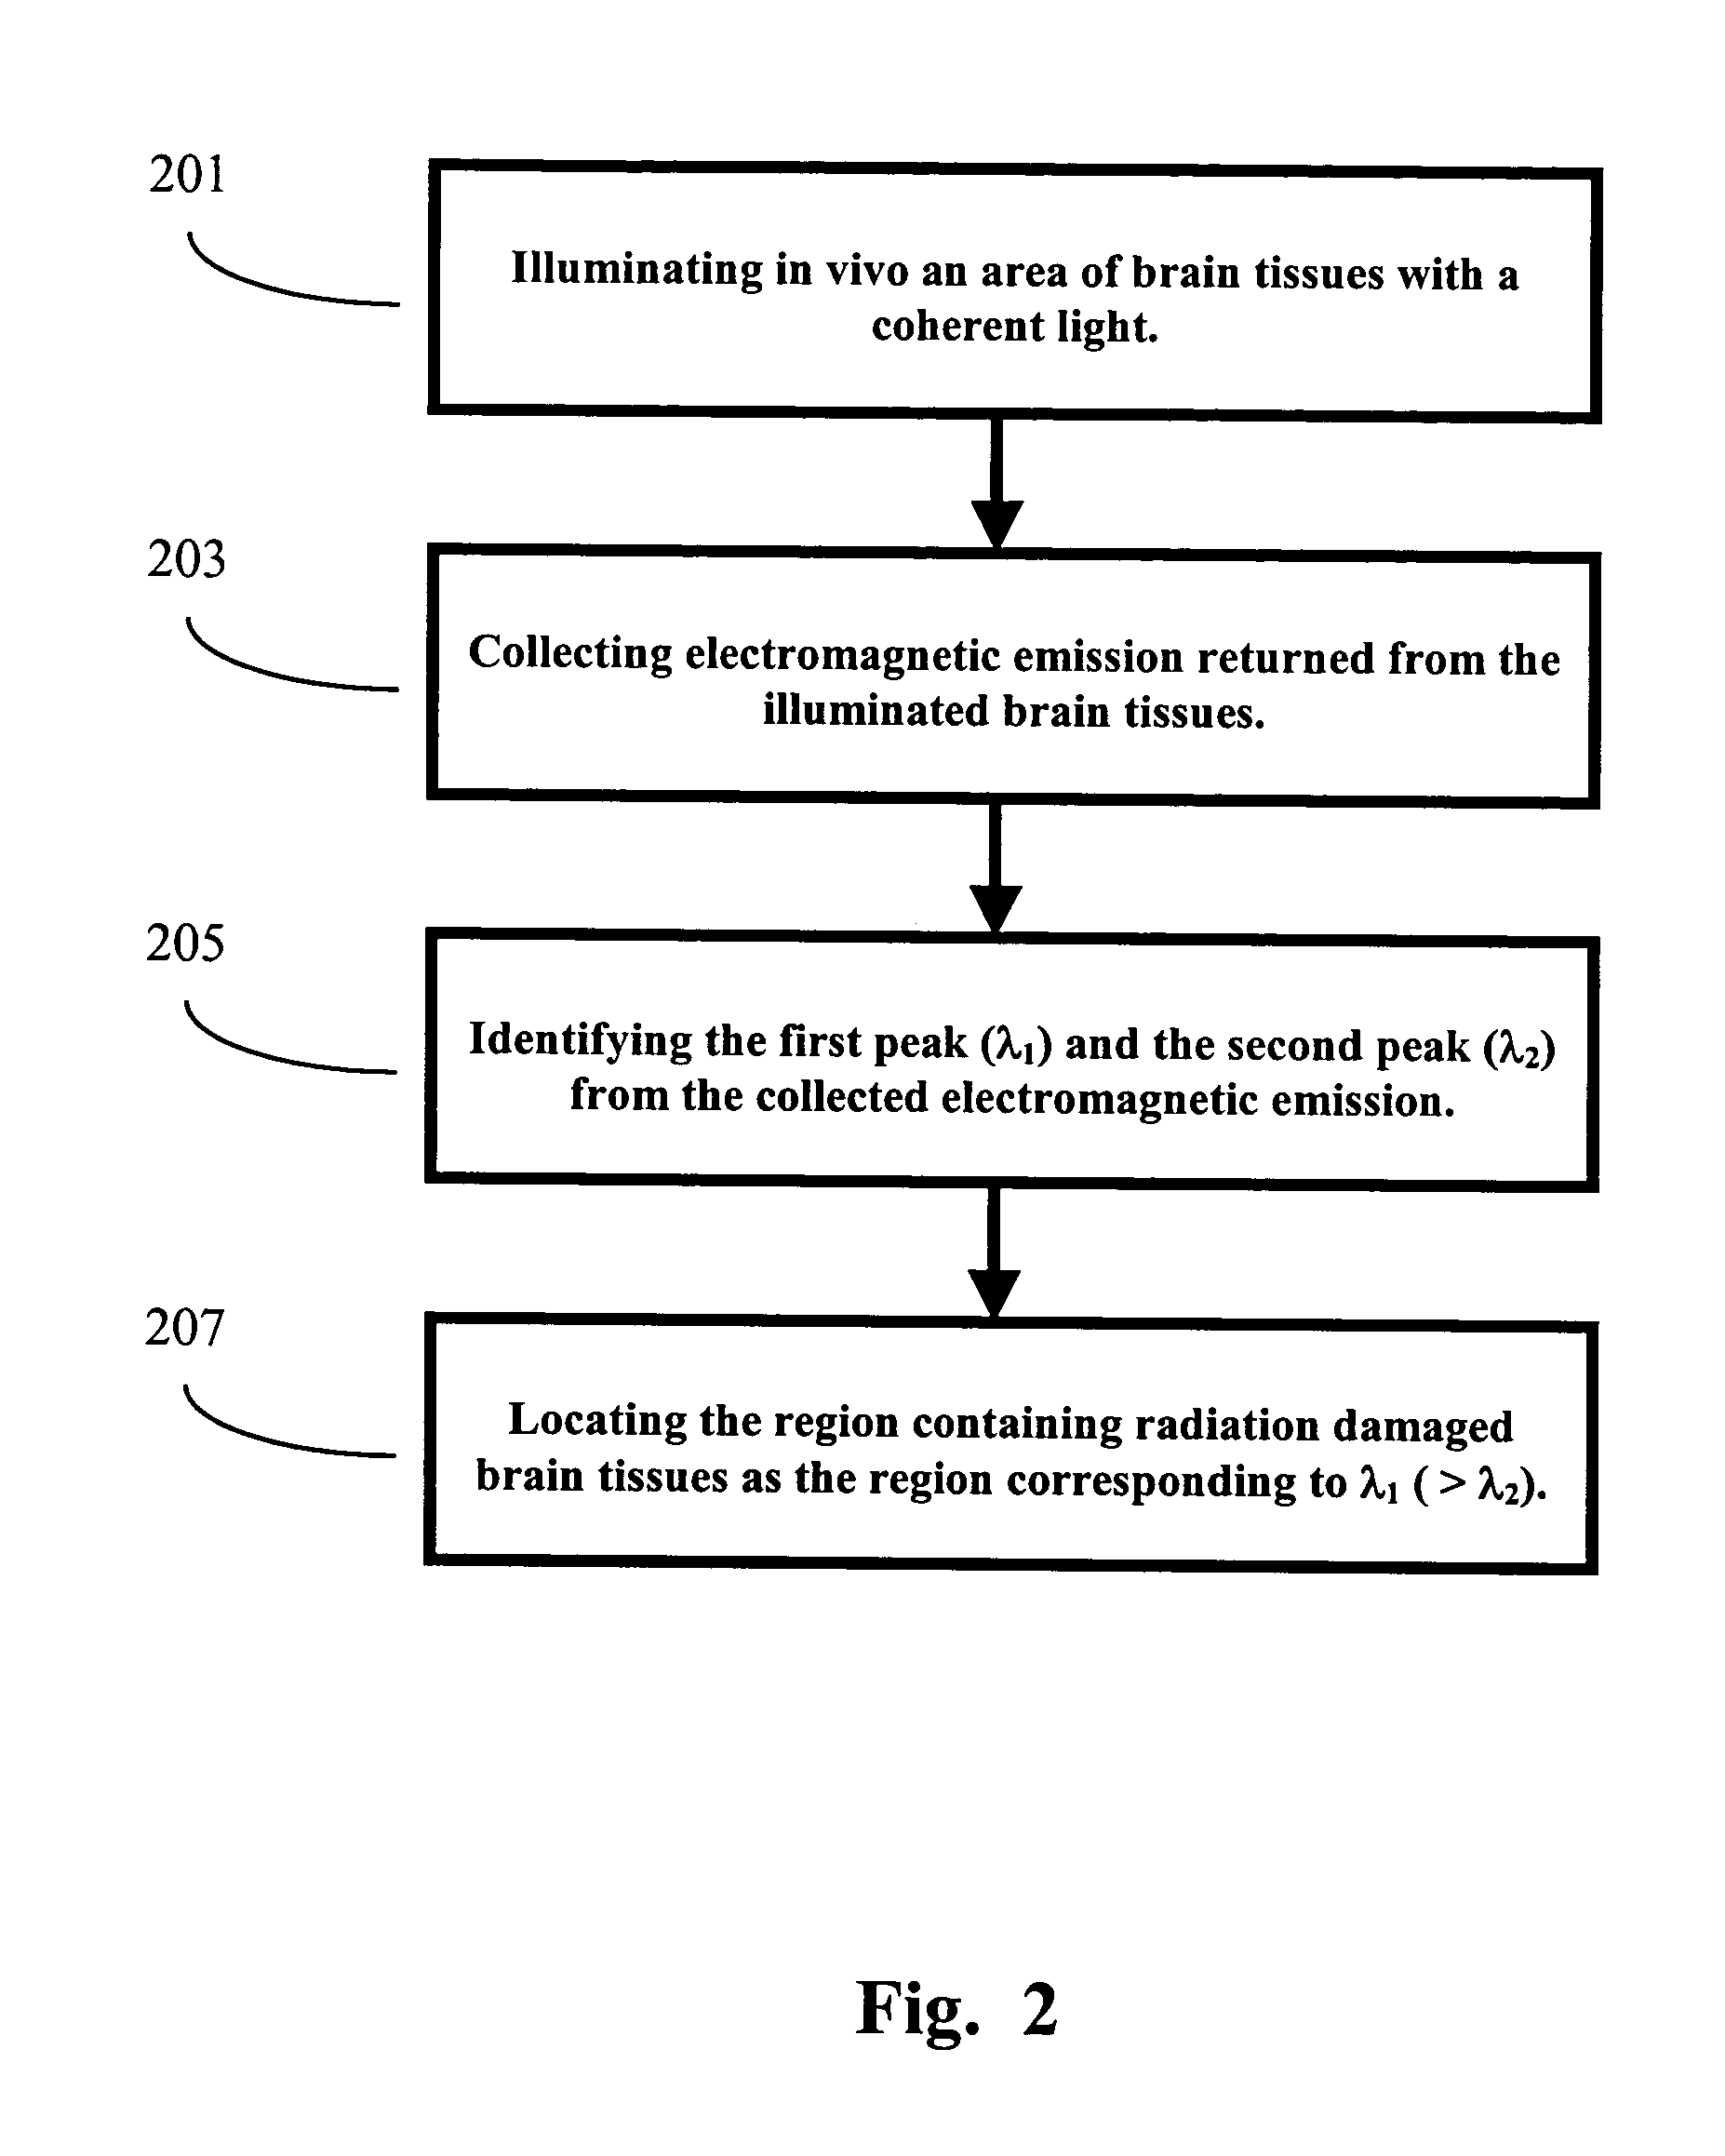 Apparatus and methods of detection of radiation injury using optical spectroscopy